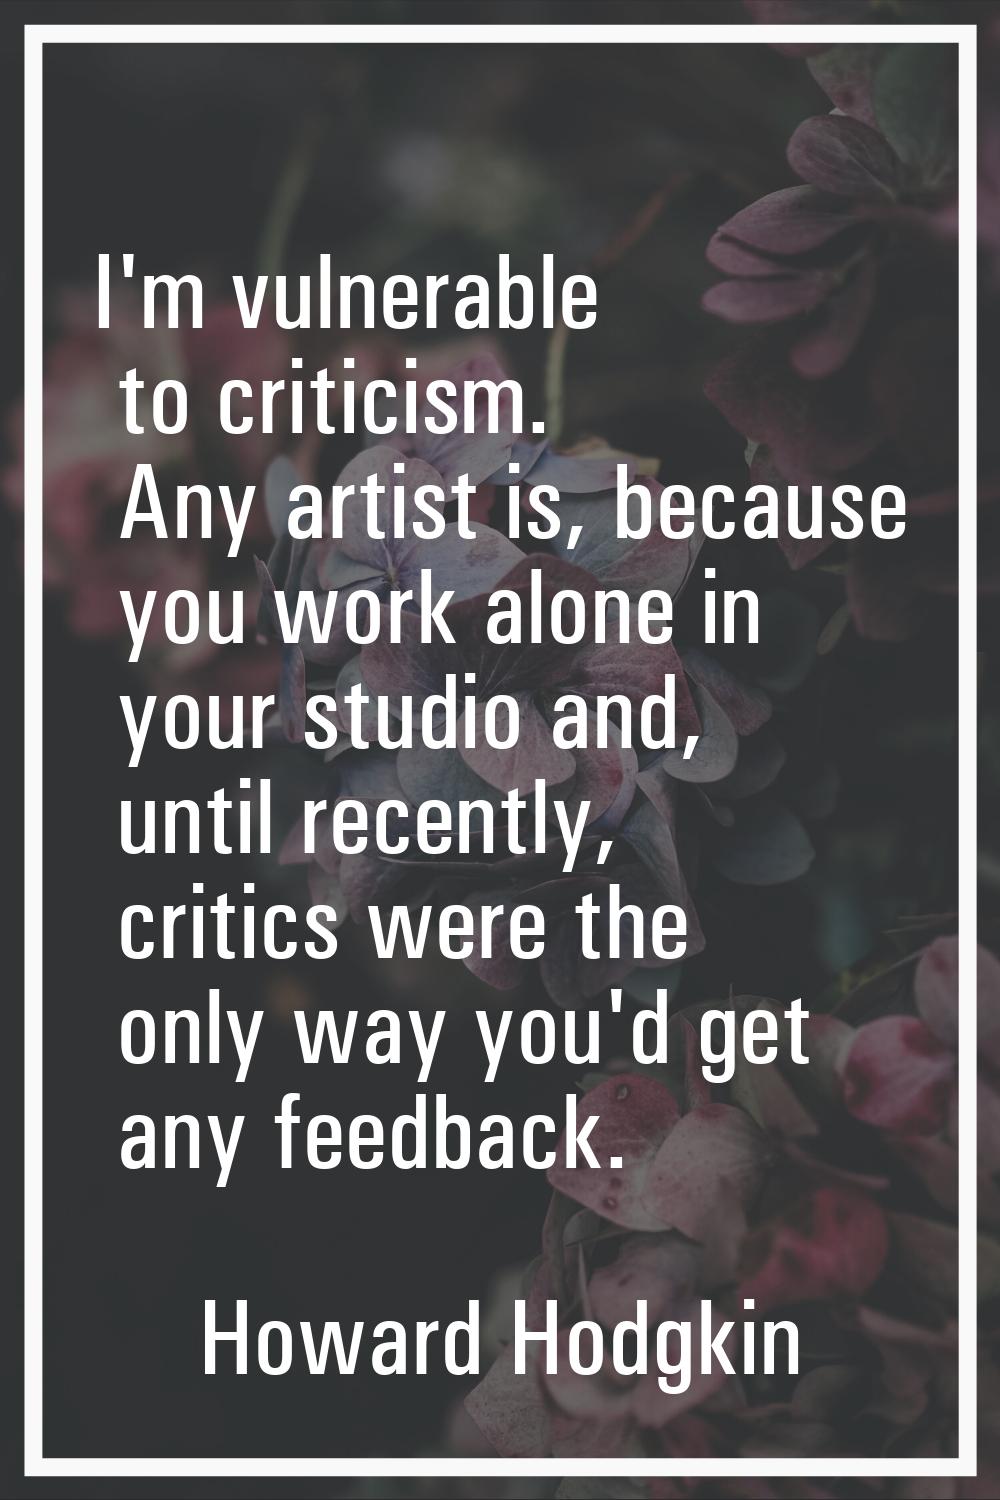 I'm vulnerable to criticism. Any artist is, because you work alone in your studio and, until recent